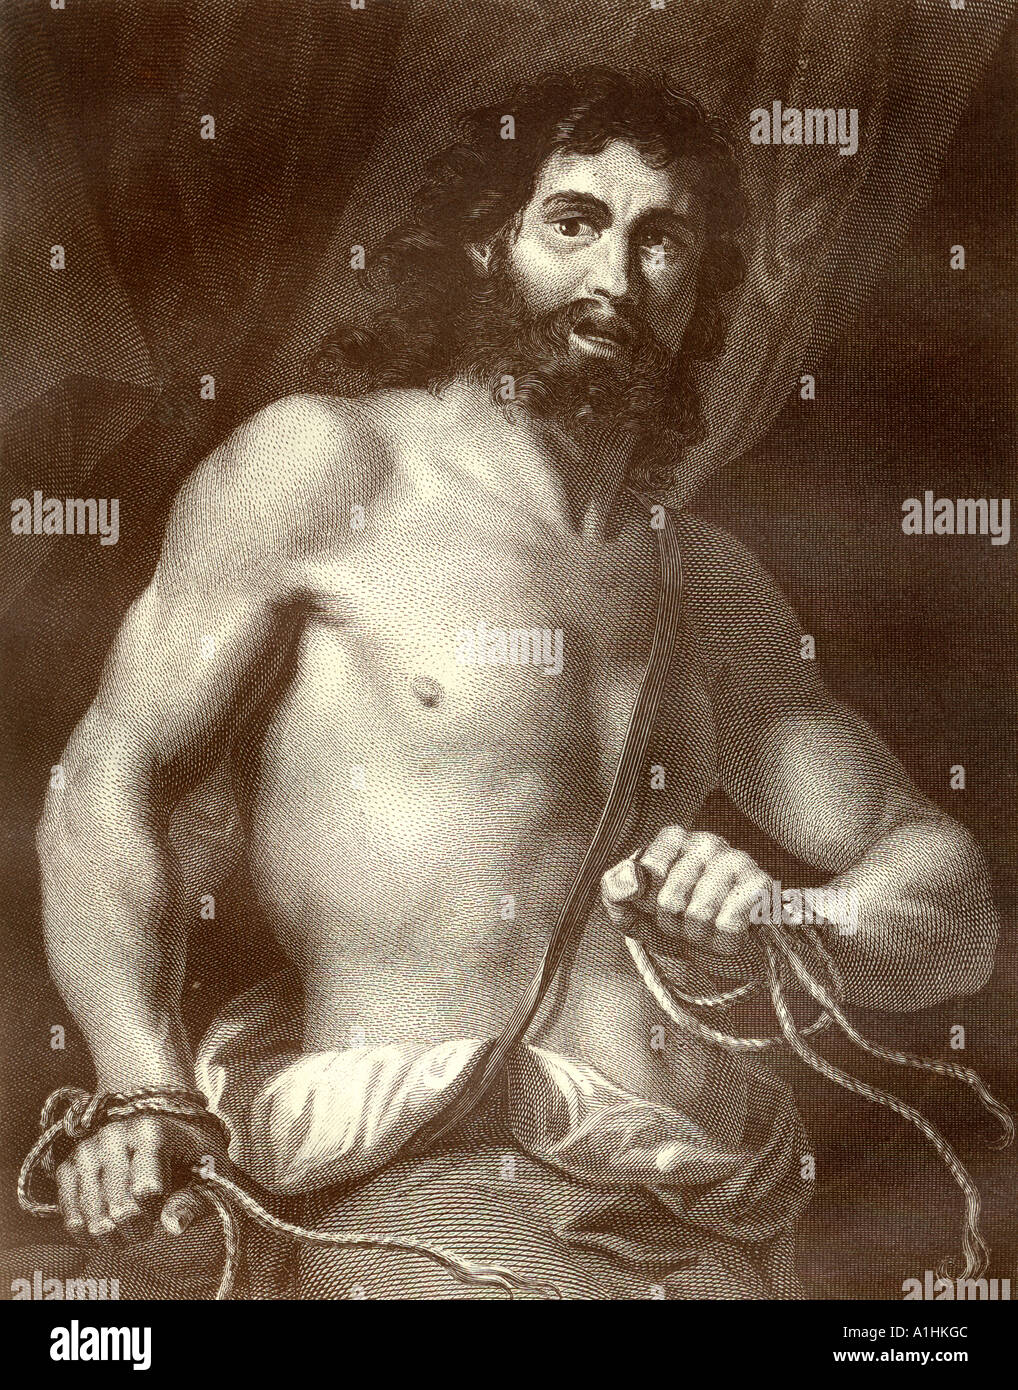 Samson From an edition of John Browns Self Interpreting Bible first published in 1778 Stock Photo